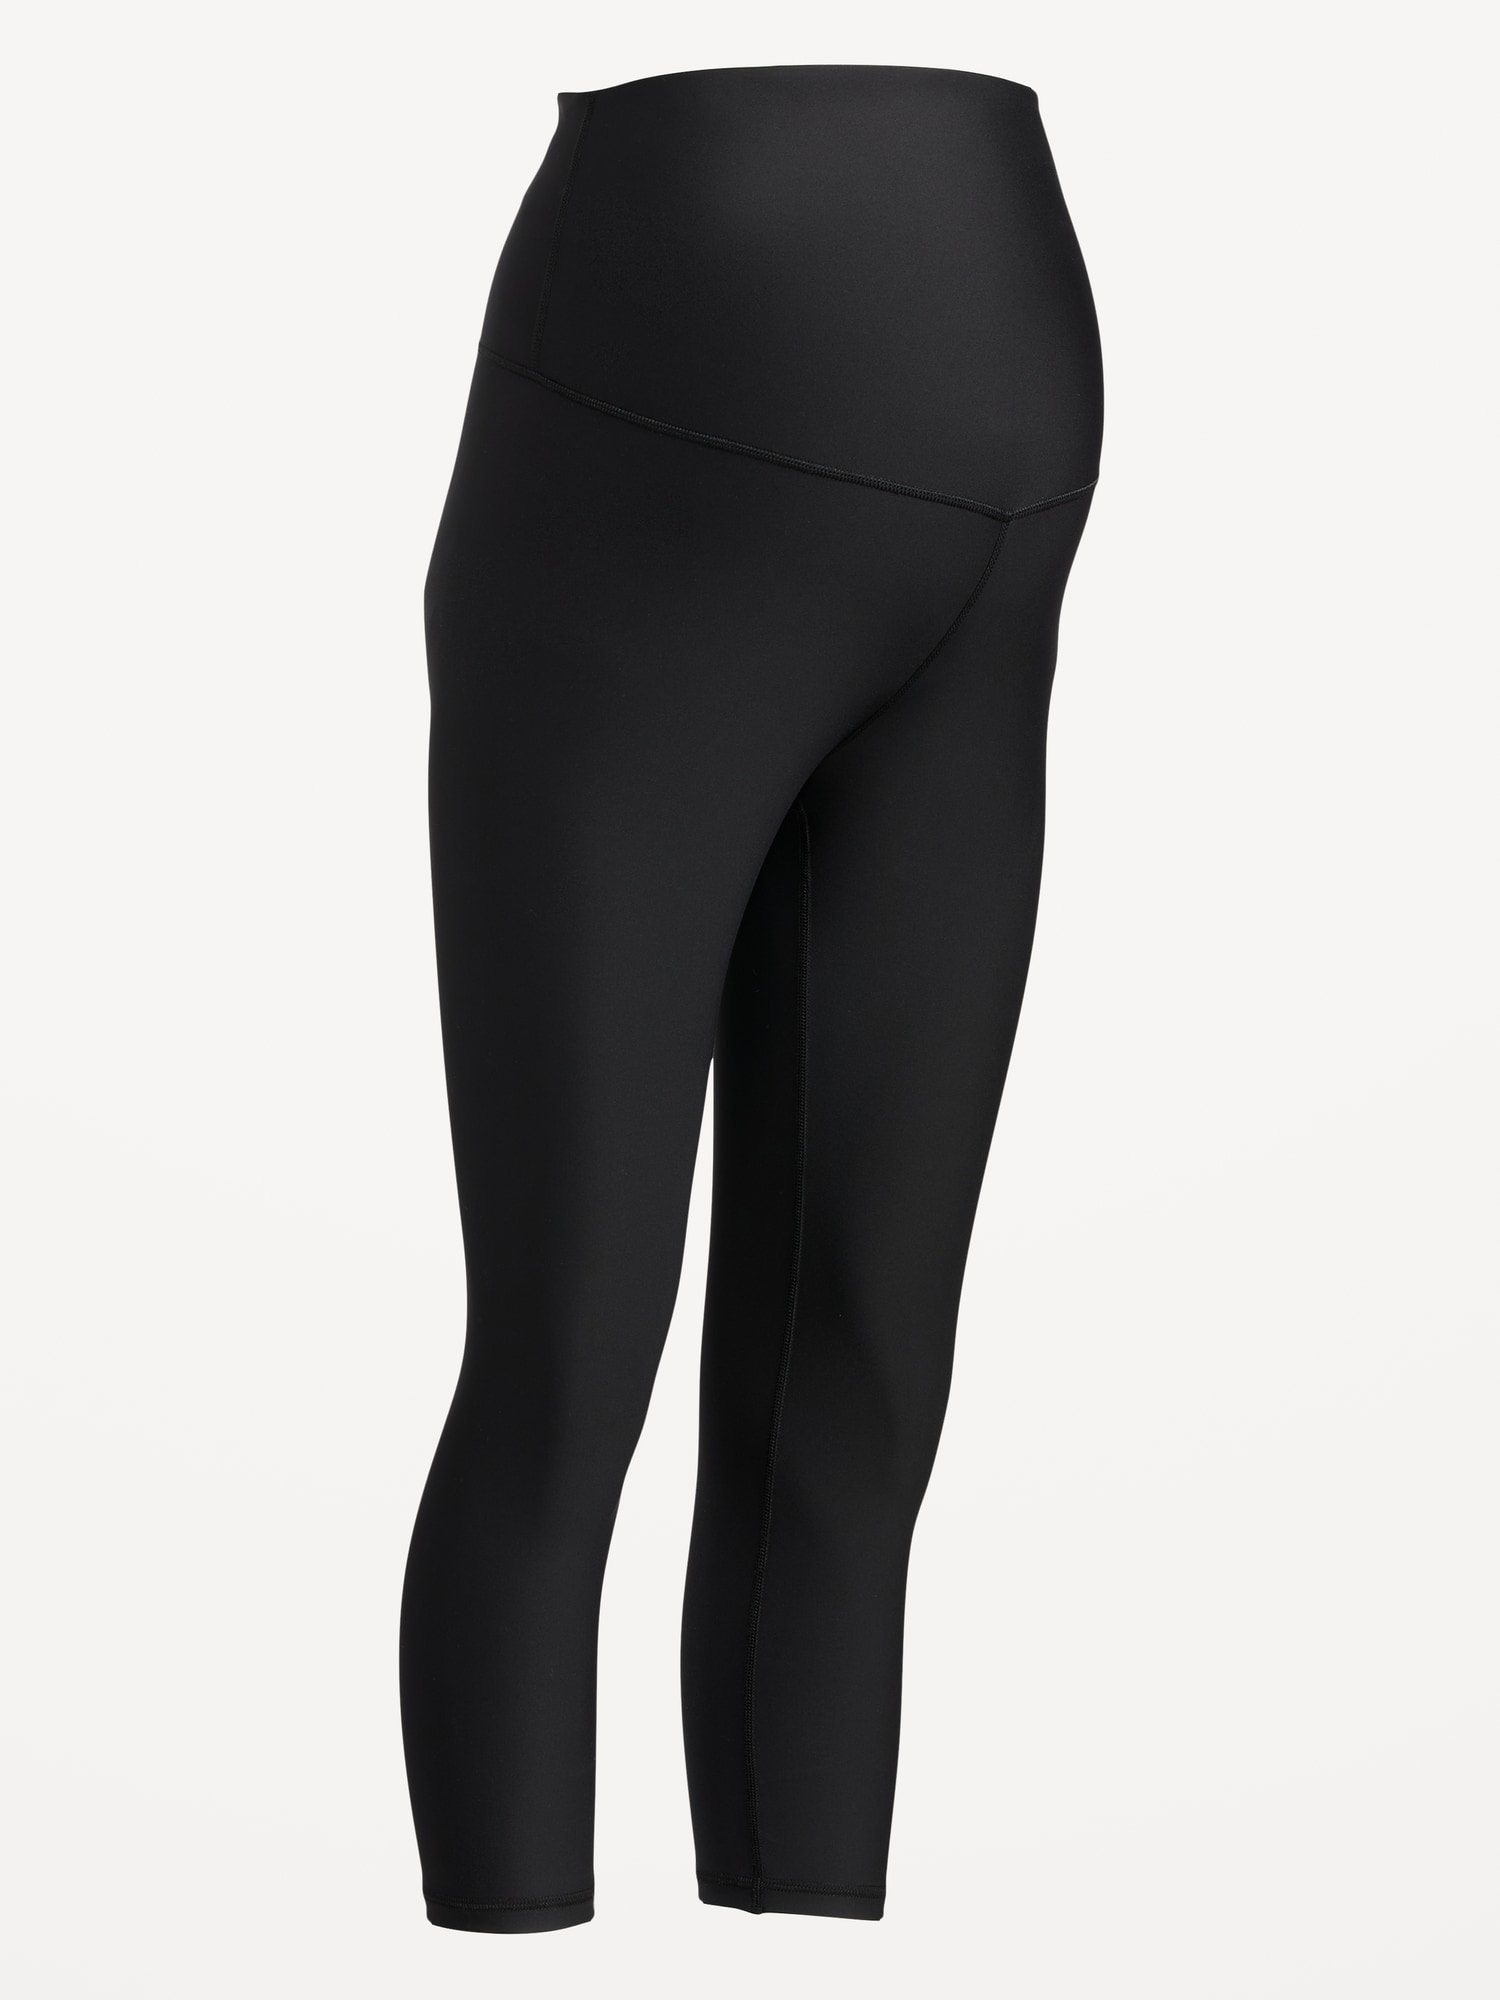 Everform - The Essential Support Maternity Leggings are the 'little black  dress' of your maternity wardrobe! They have a medium support featuring  built-in side pockets for everything-but-the-kitchen-sink. They are made  with ultra